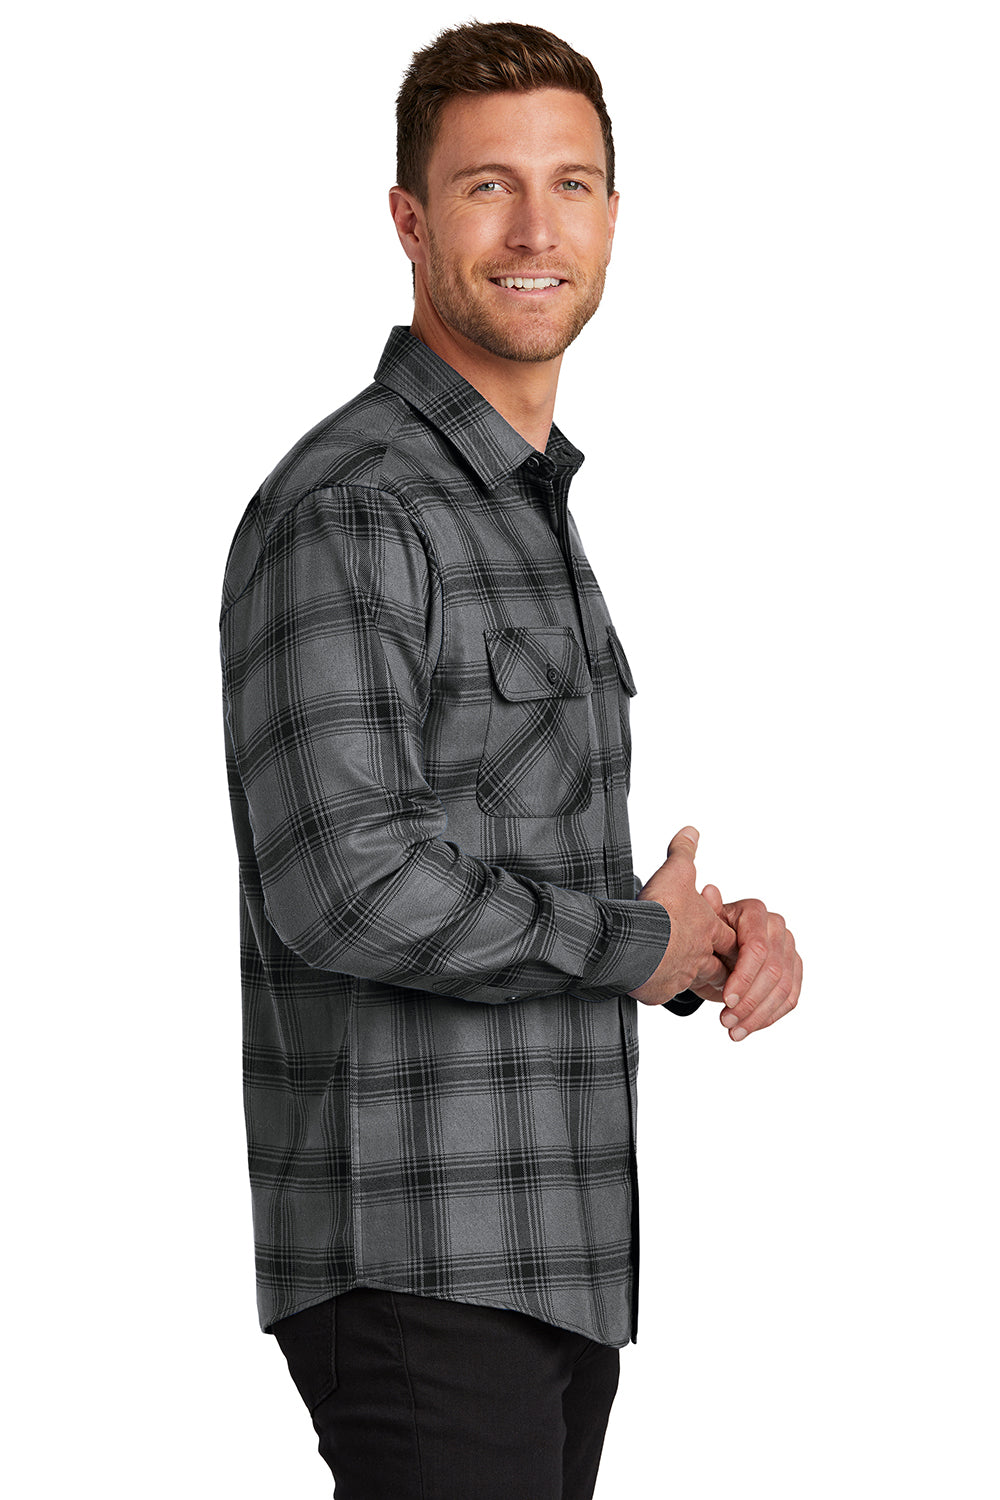 Port Authority W668 Mens Flannel Long Sleeve Button Down Shirt w/ Double Pockets Grey/Black Plaid SIde